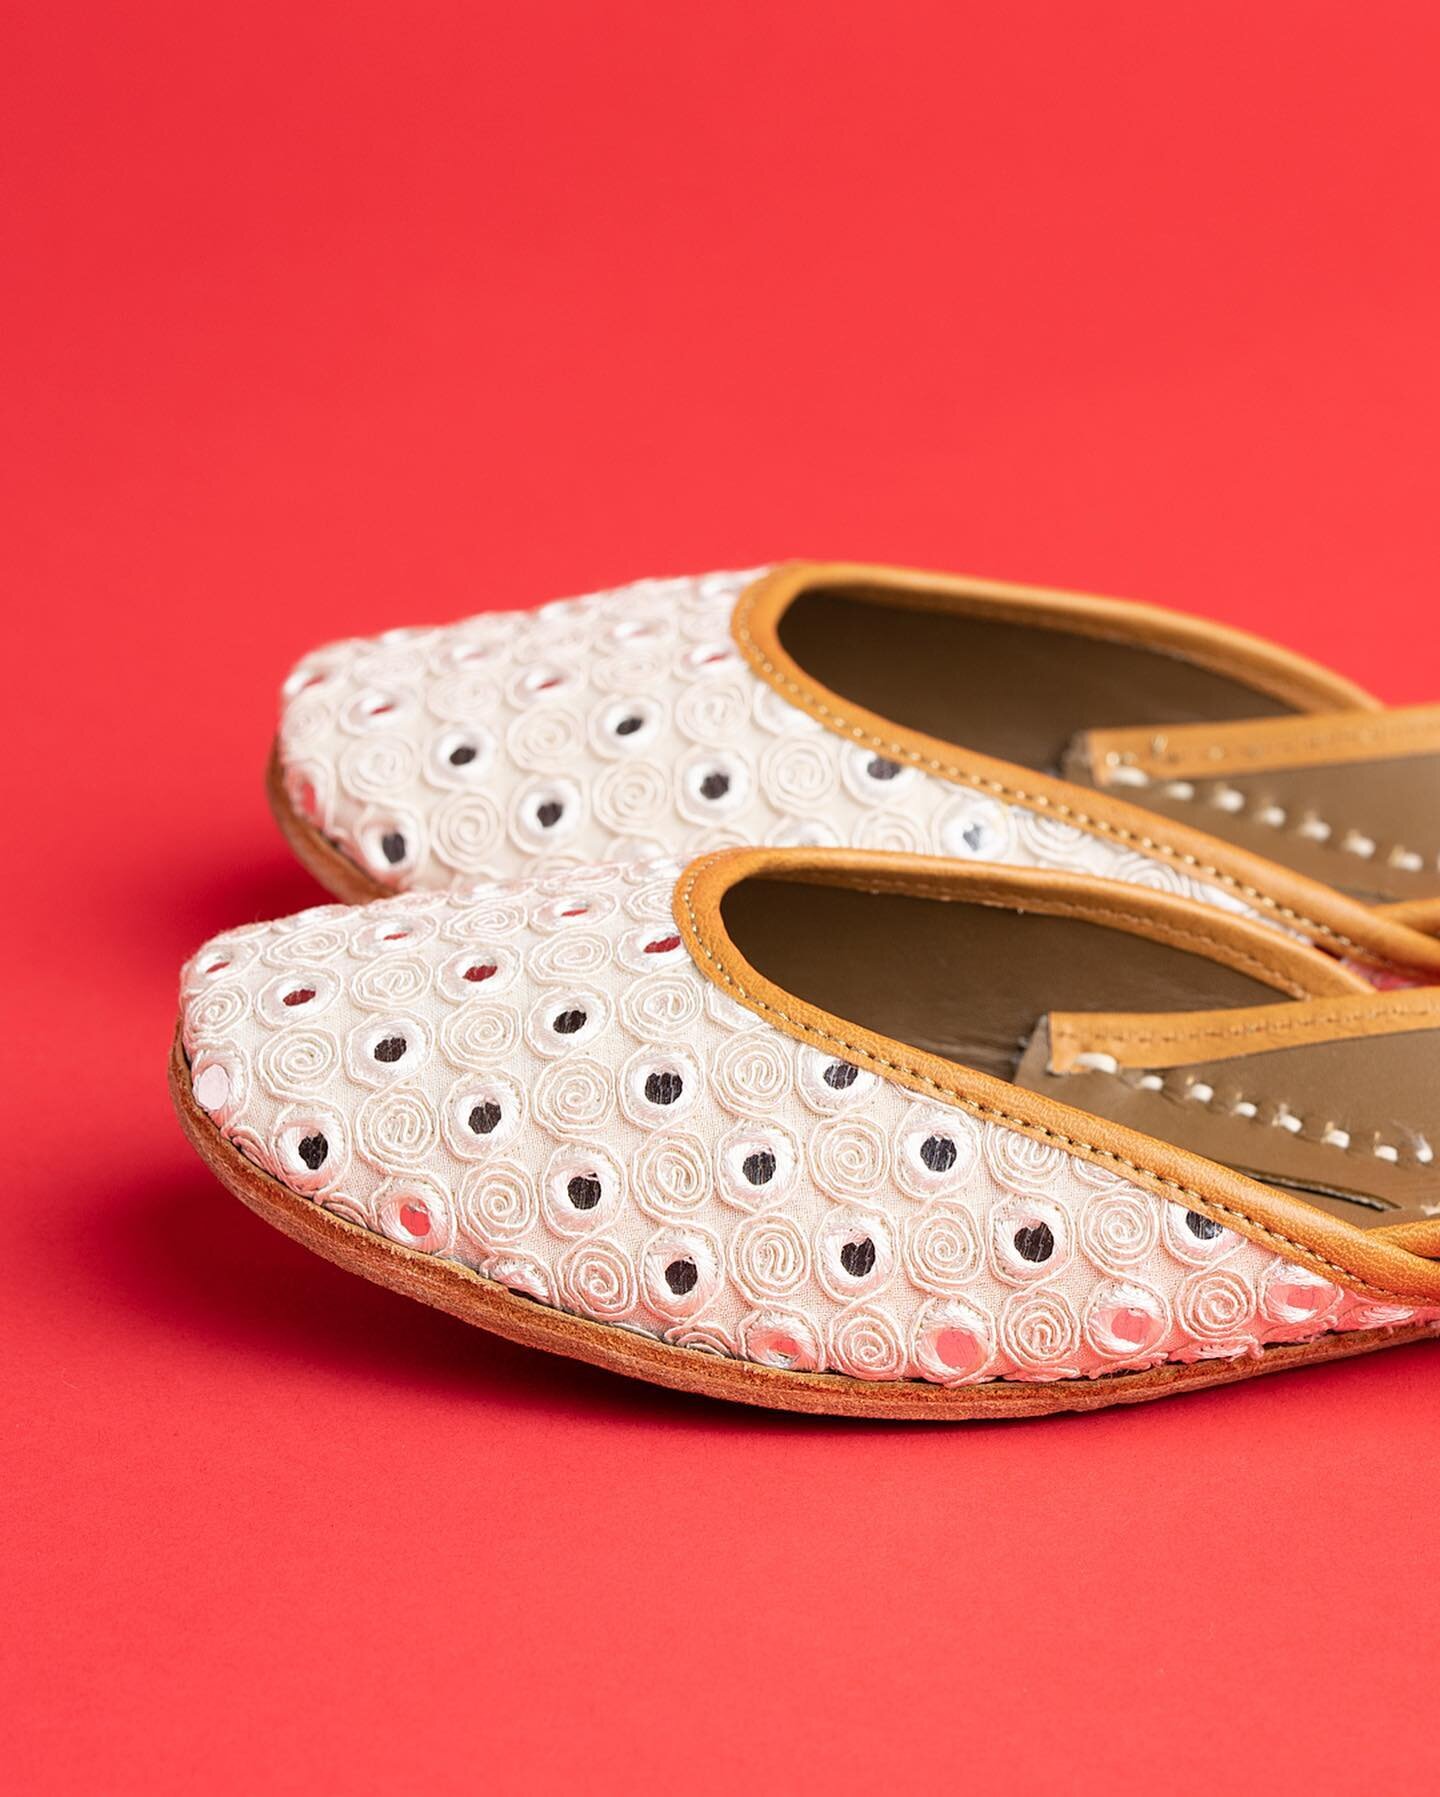 Gift local, gift small and gift unique this holiday season. Our 100% handmade jutti flats are genuine leather, super comfortable and most beautiful pair of flats you&rsquo;ll ever gift(to yourself or someone). #christmasgiftideas #holidays2022 #holid